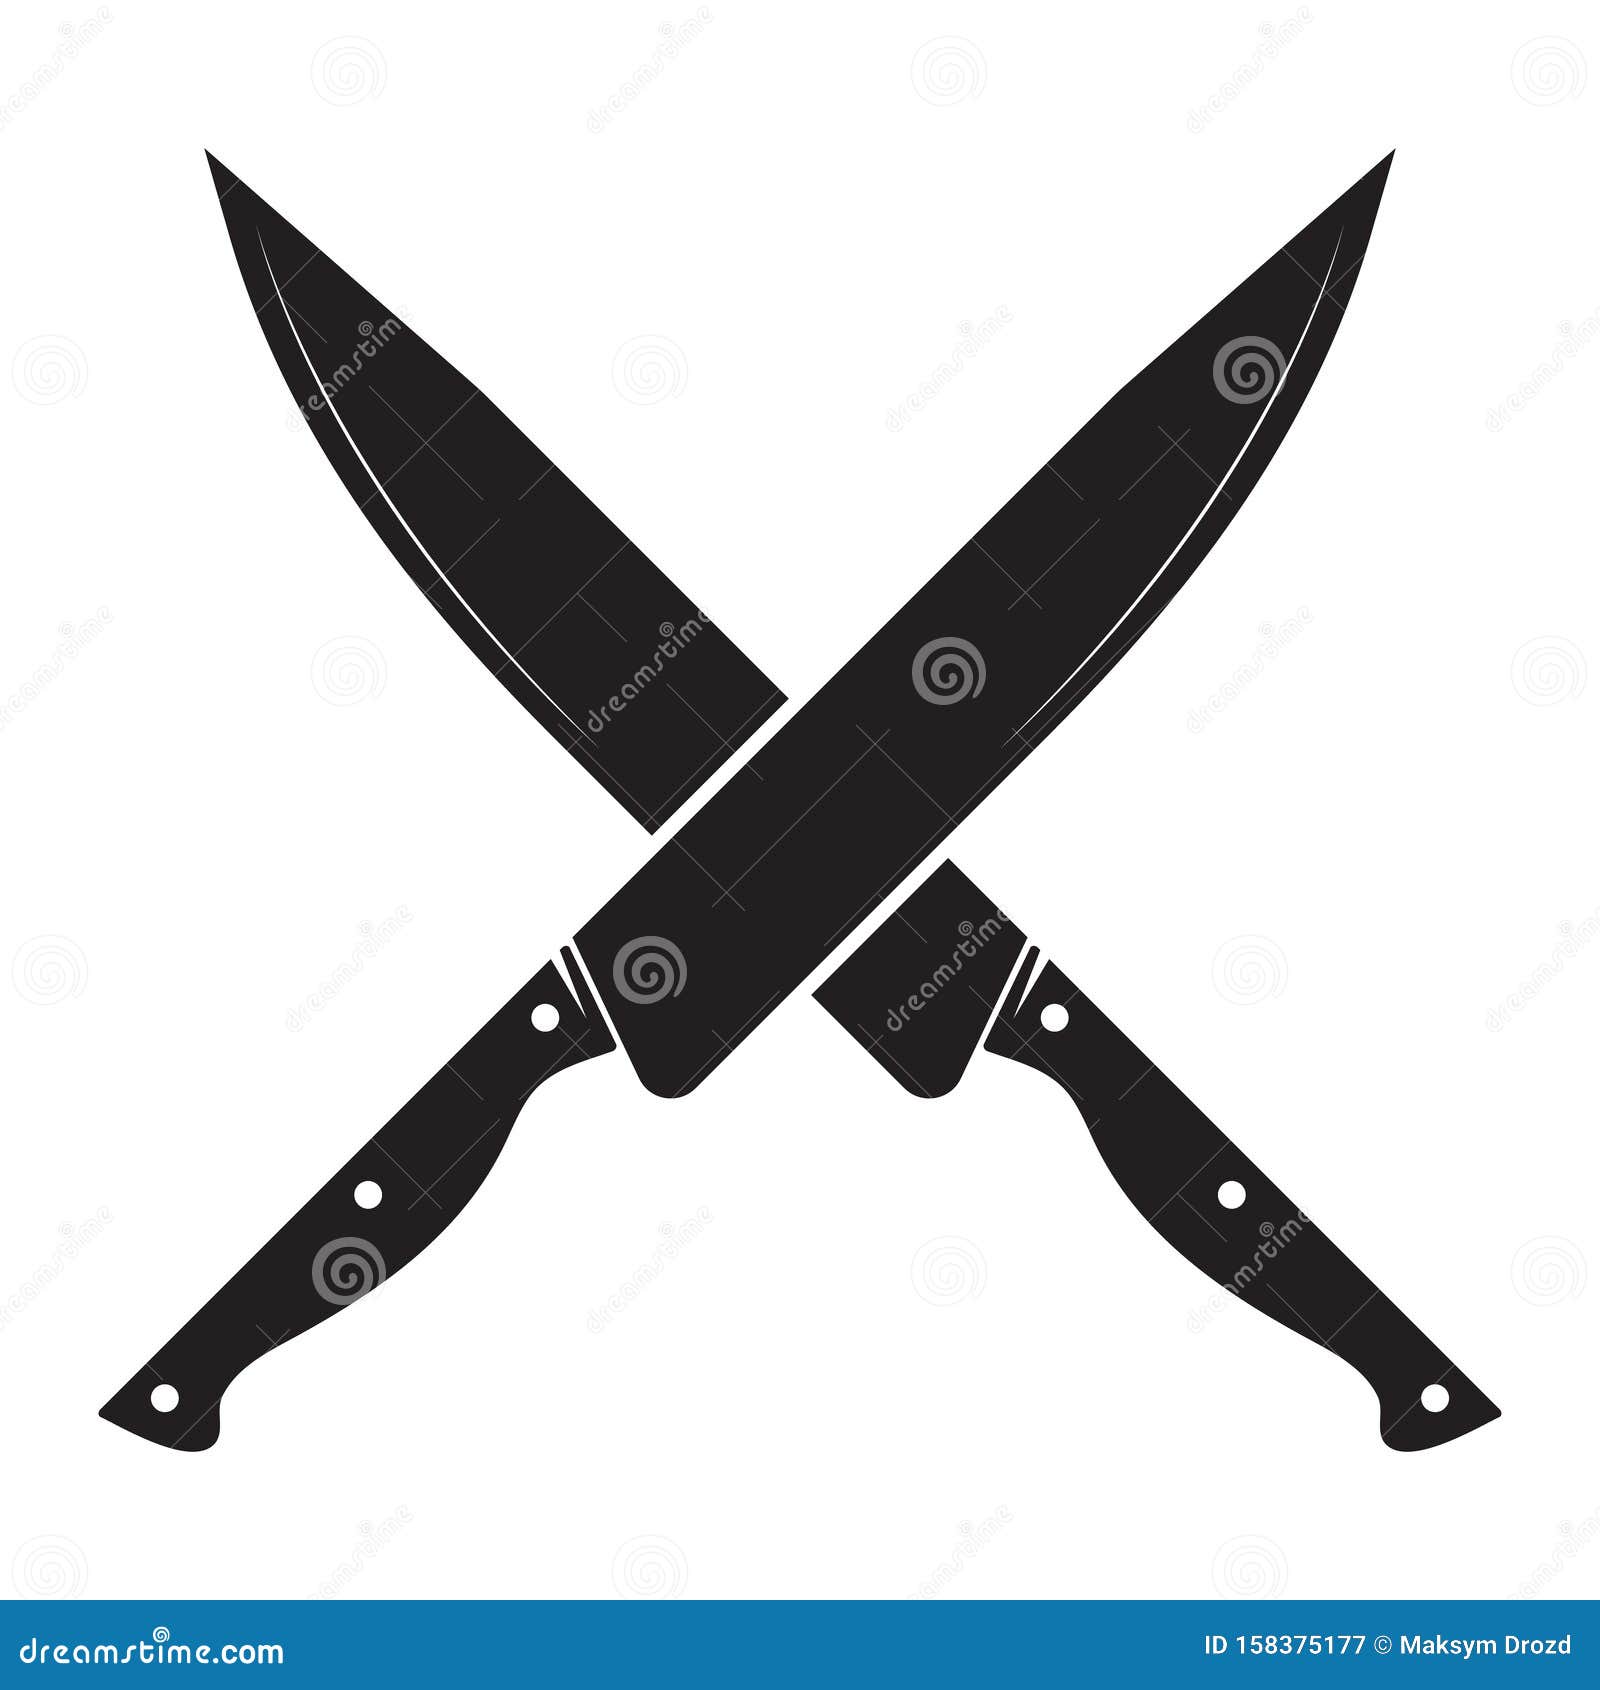 https://thumbs.dreamstime.com/z/crossed-knives-icon-knife-chef-kitchen-symbol-flat-isolated-illustration-crossed-knives-icon-knife-chef-kitchen-158375177.jpg